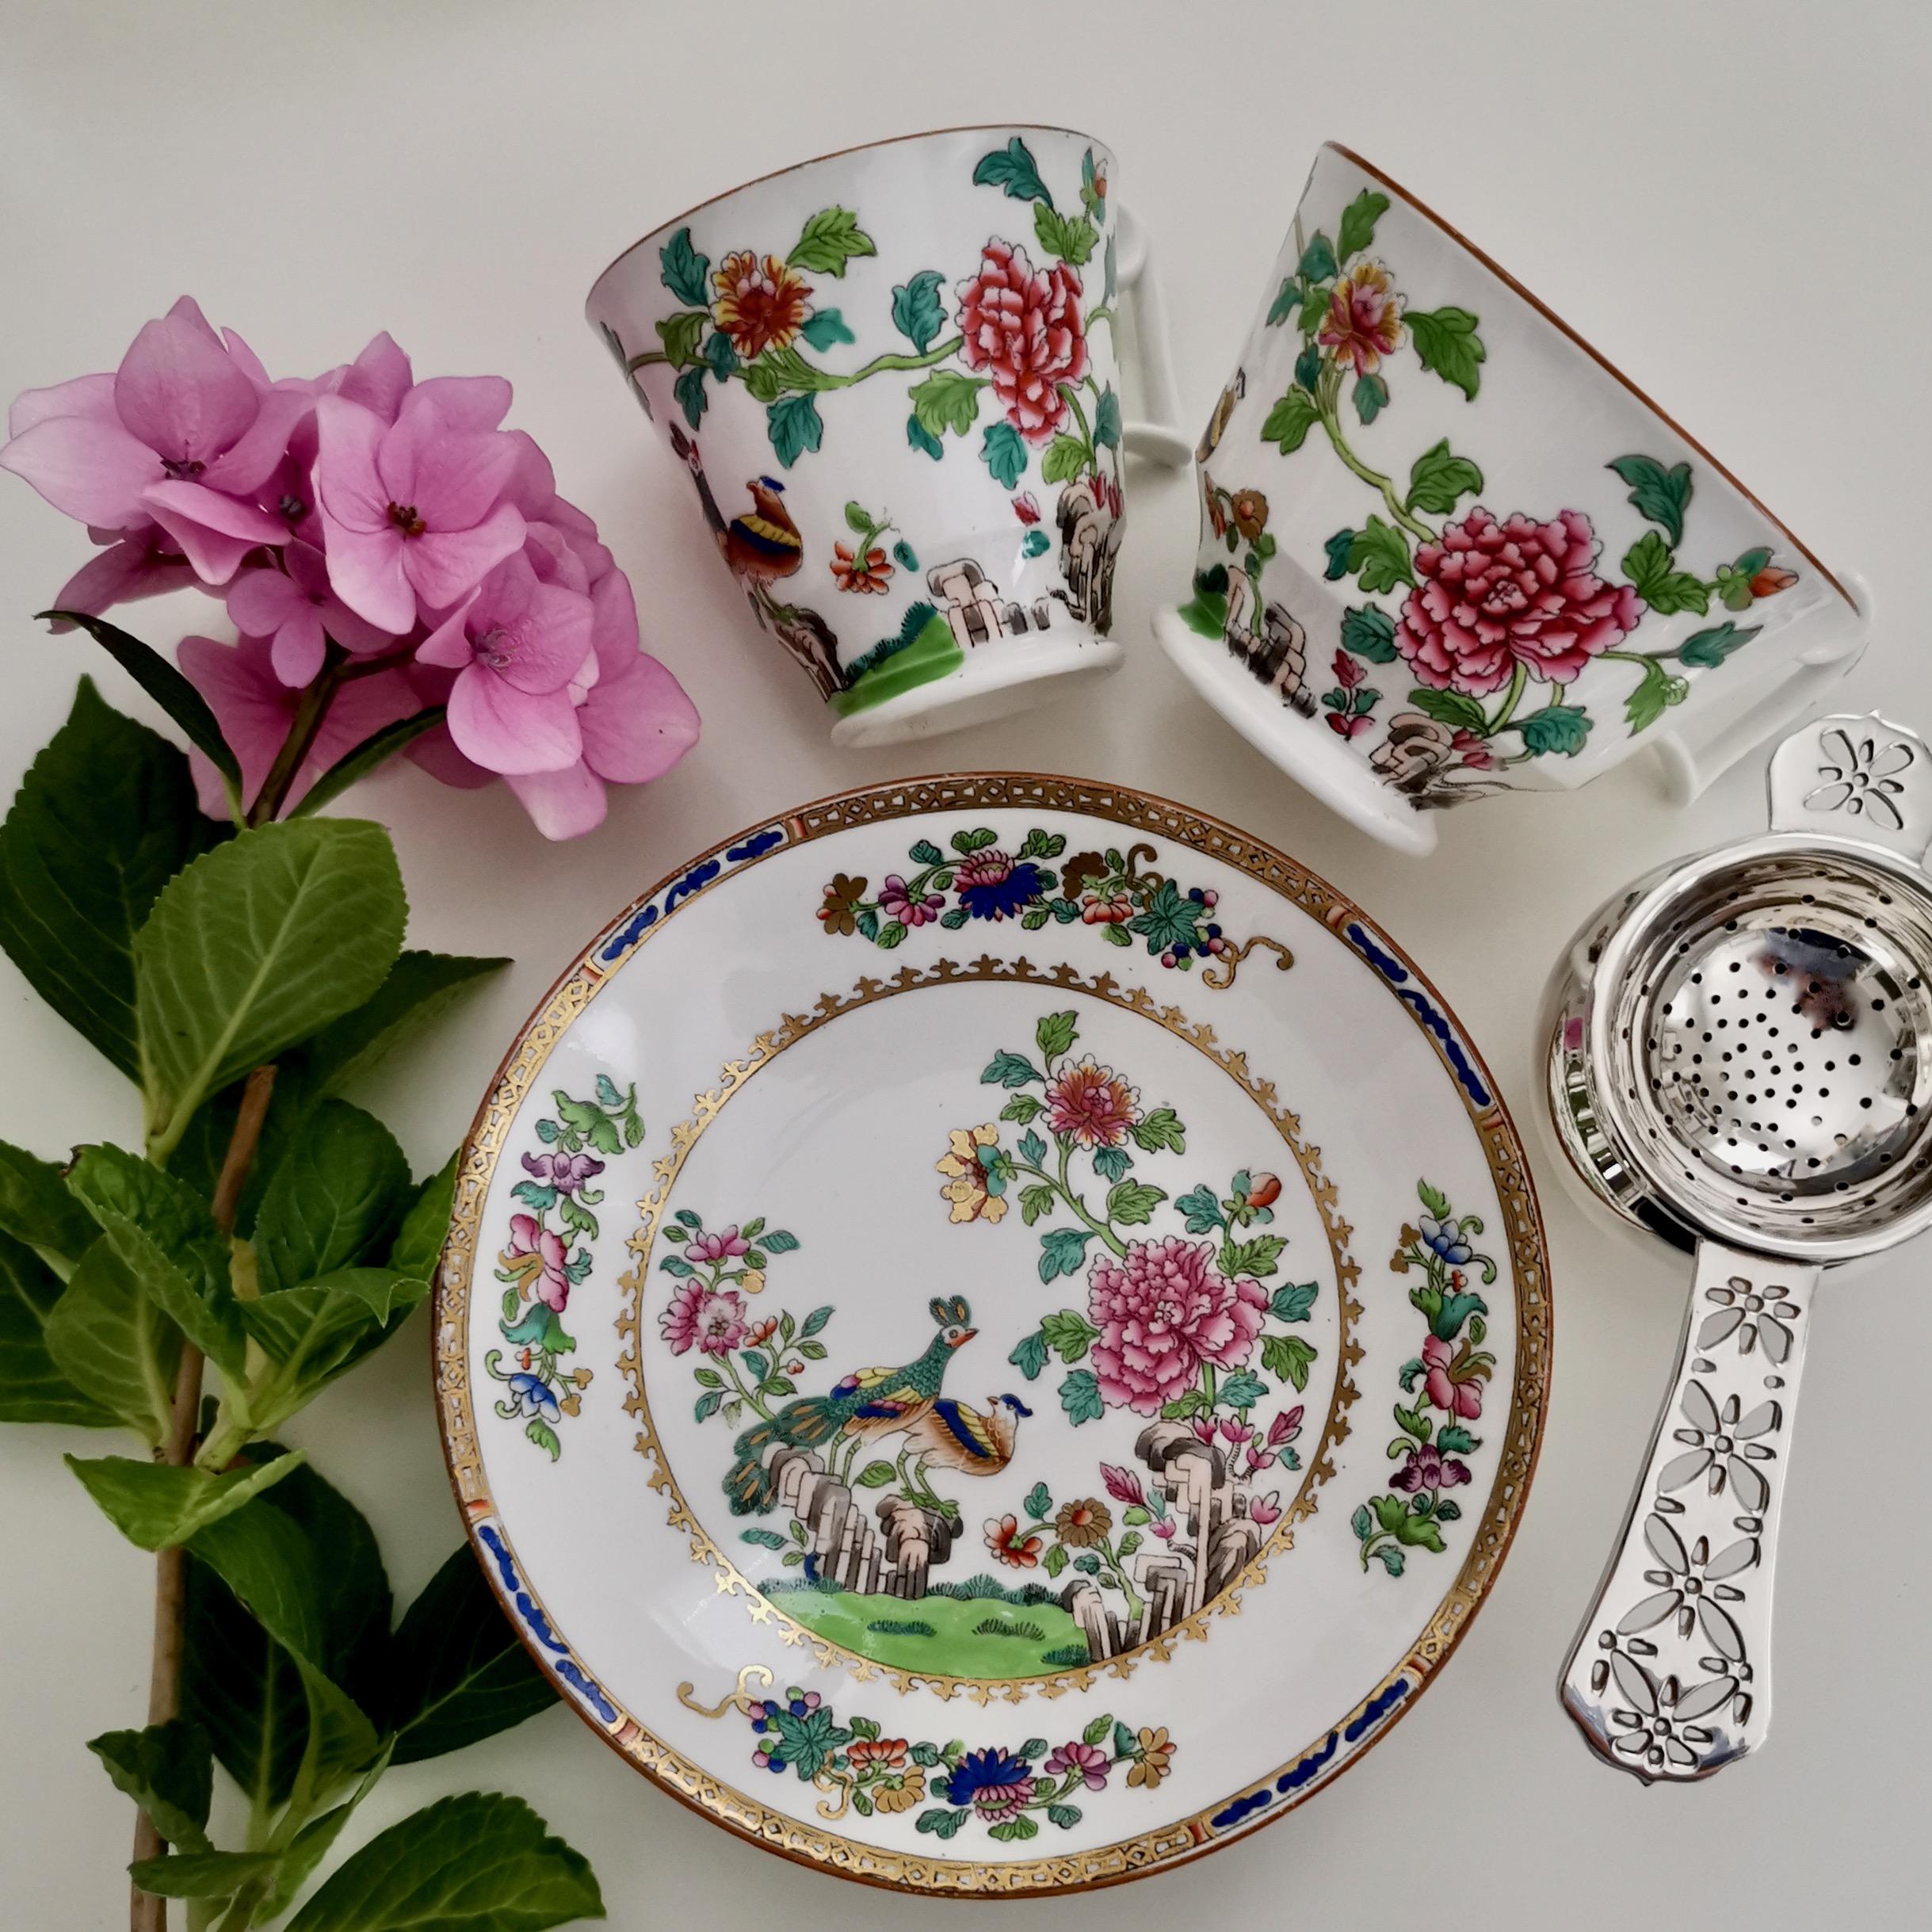 This is a beautiful true trio made by Spode between 1813 and 1825. In the late 18th and early 19th century teacups and coffee cups would share a saucer, as you would never drink tea and coffee at the same time, why invest in an extra